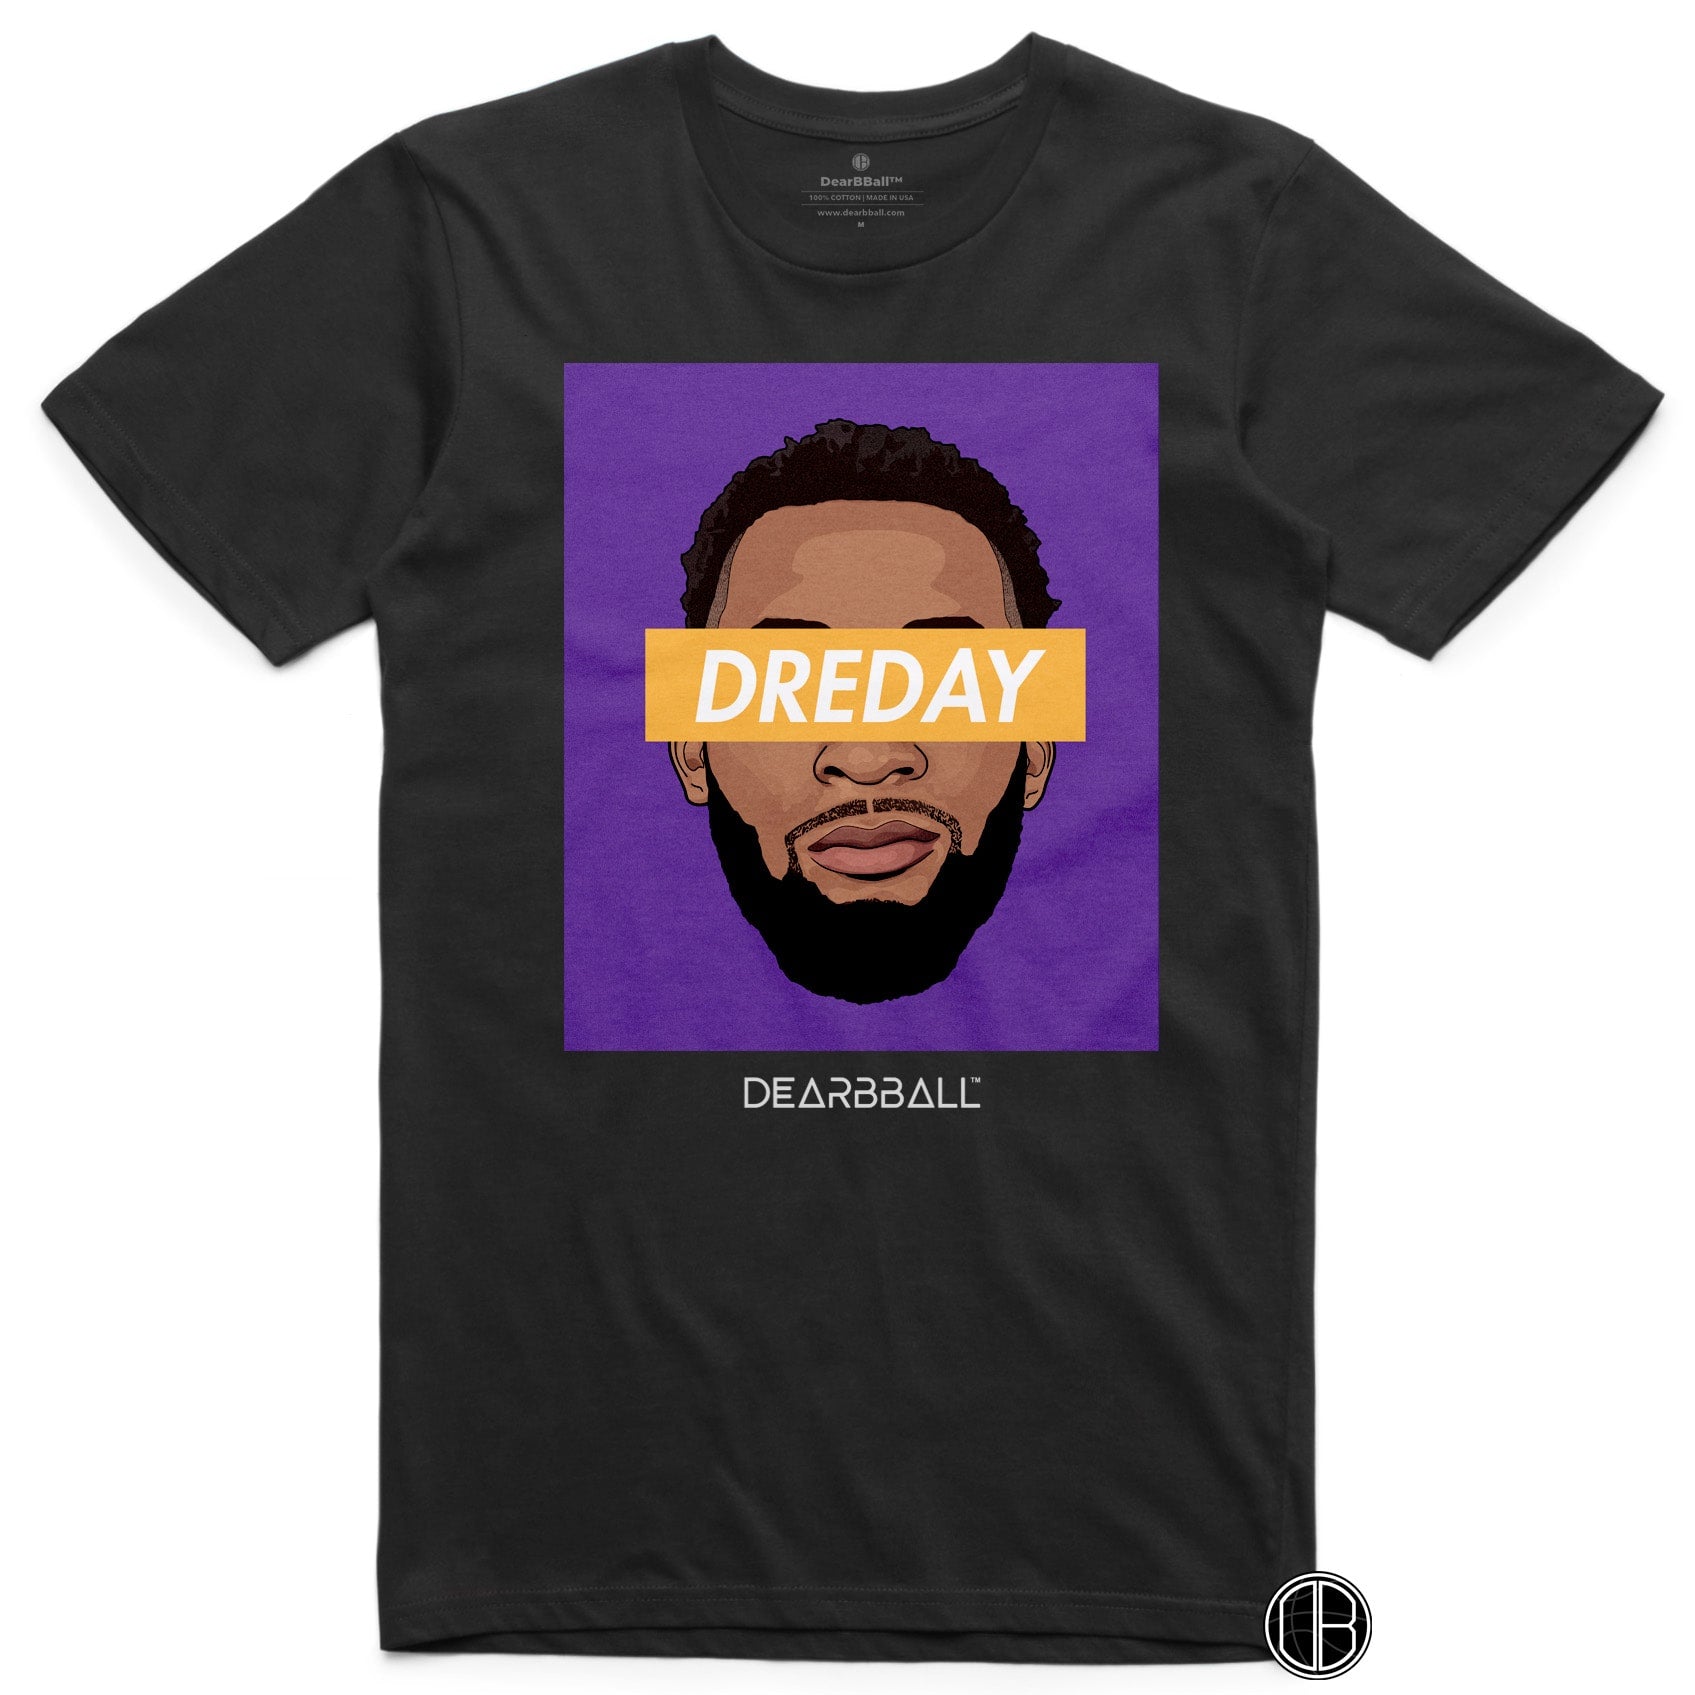 Andre Drummond T-Shirt Bio - DRE DAY Purple Los Angeles Lakers Basketball Dearbball blanc